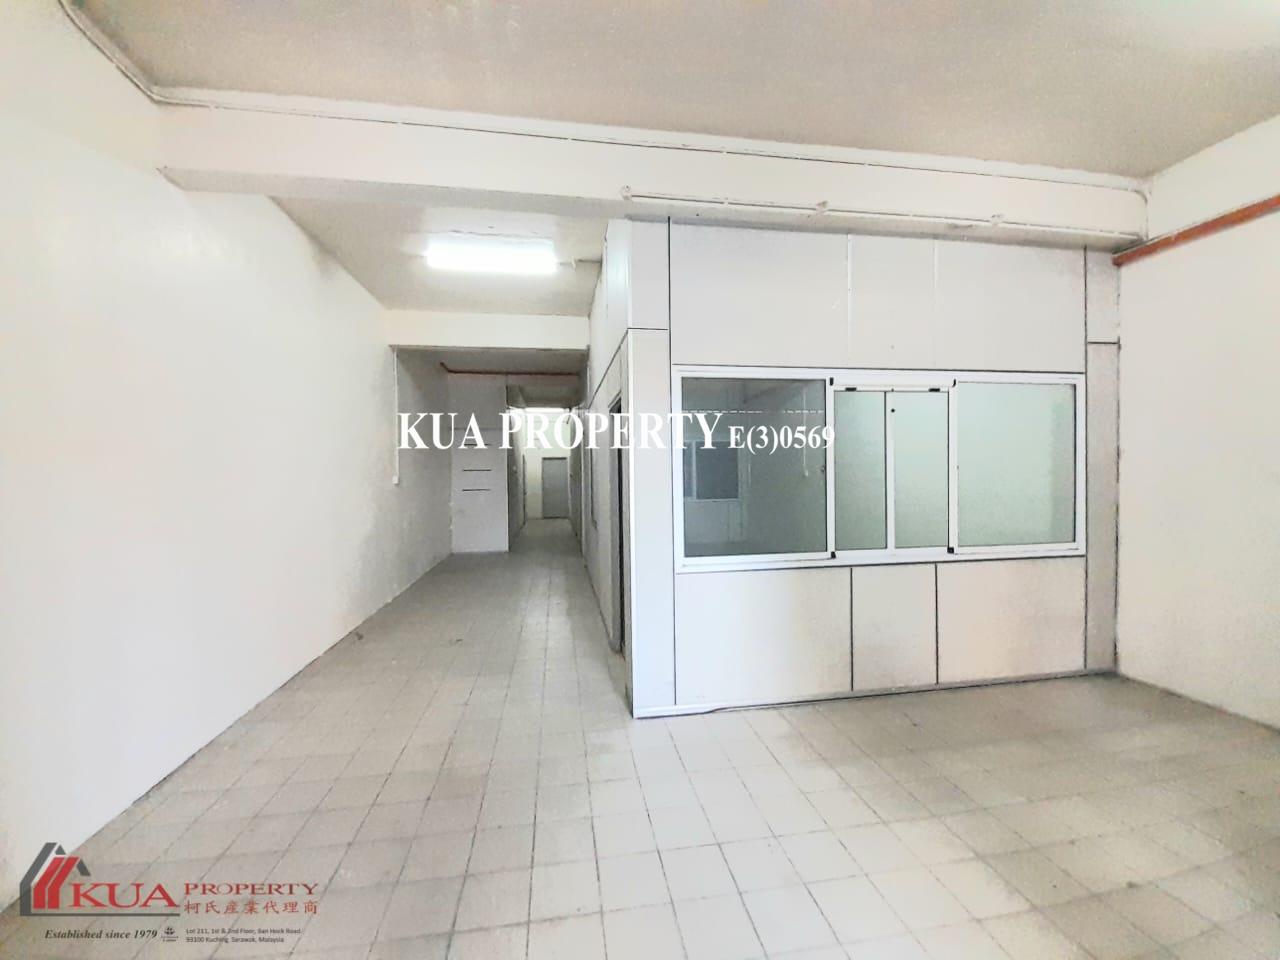 2 Storey Shophouse For Rent Located at 7th Miles, Jalan Penrissen